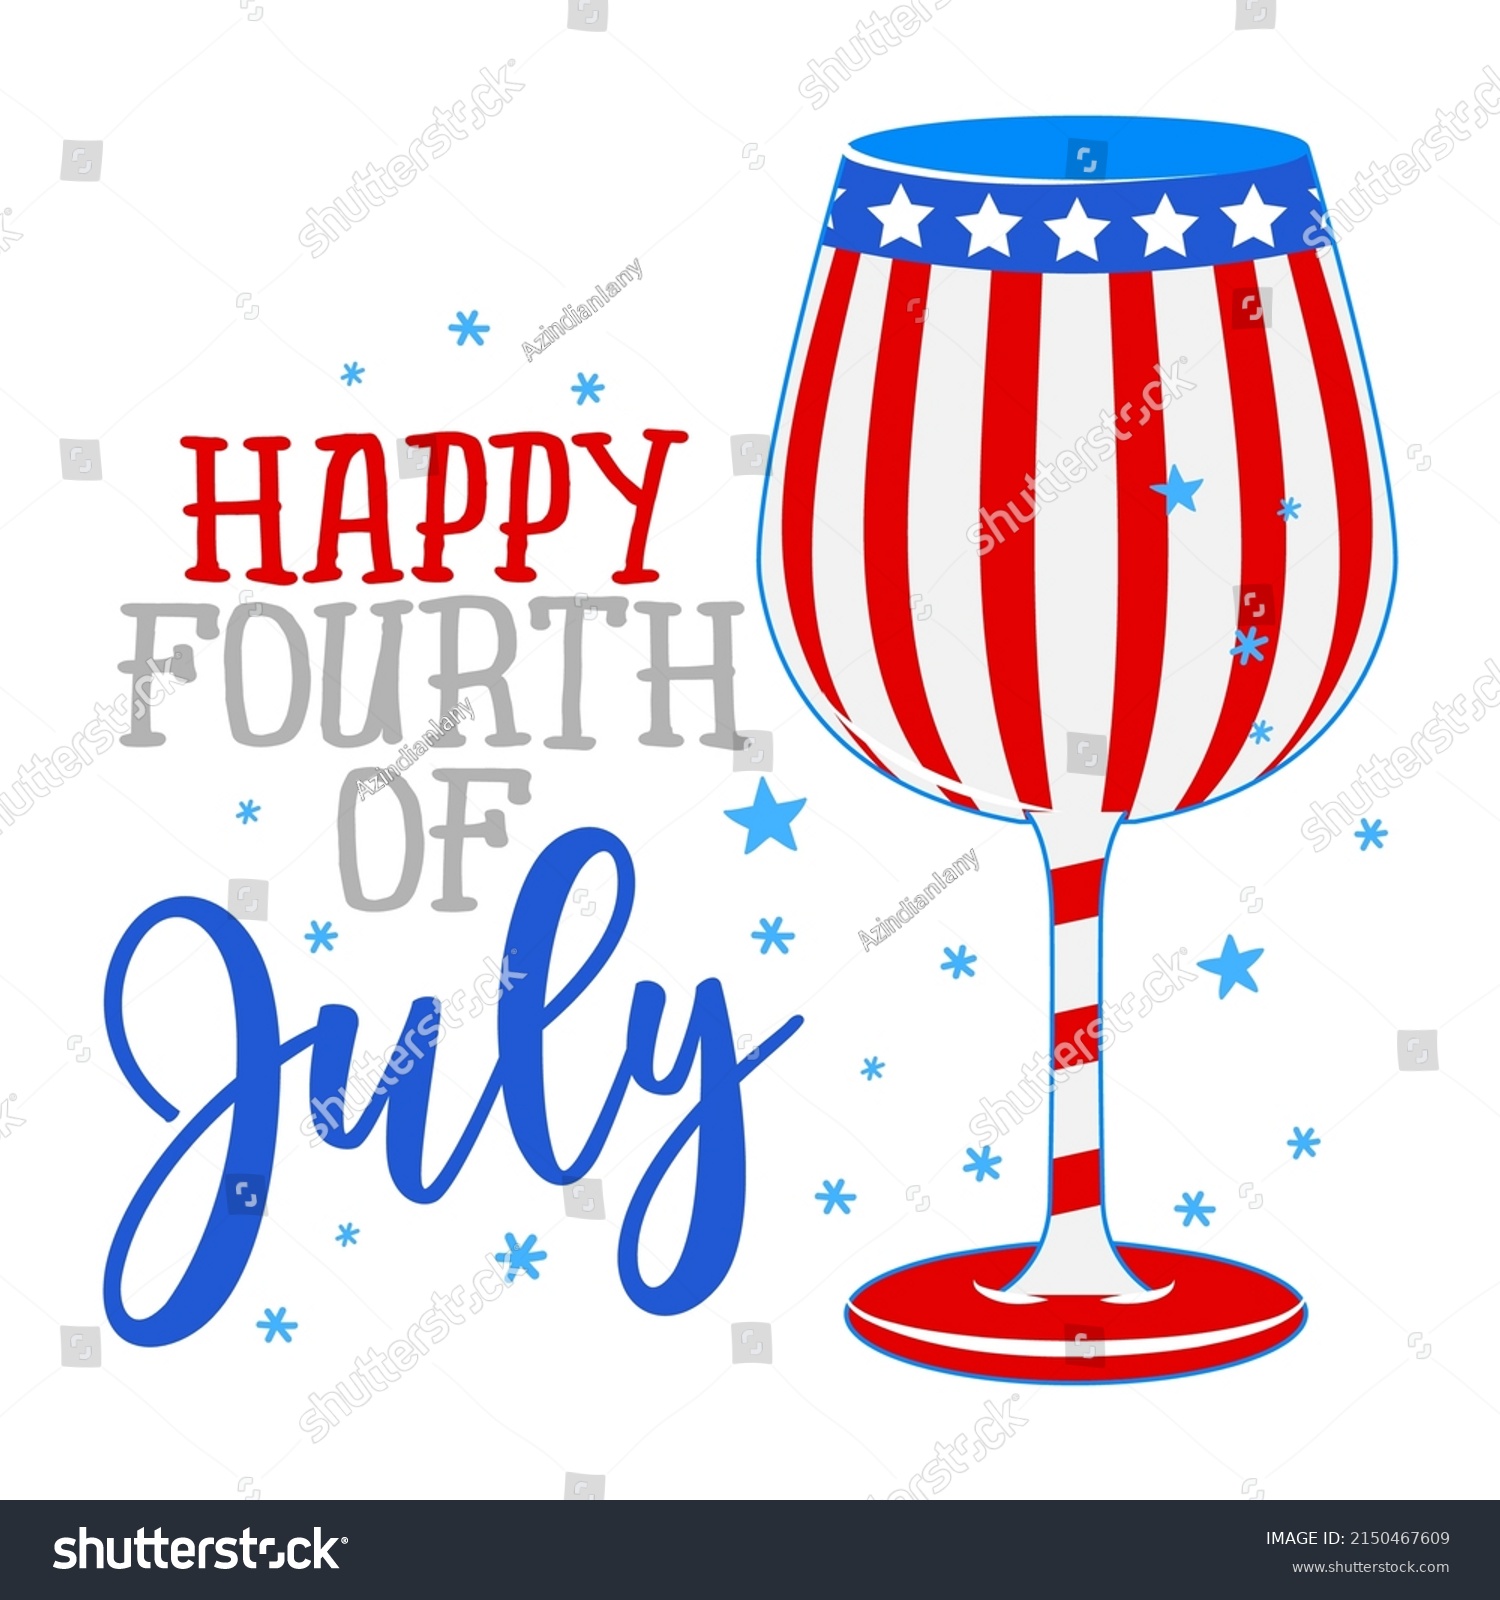 SVG of Happy fourth of July - Happy Independence Day July 4 lettering design illustration. Good for advertising, poster, announcement, invitation, party, greeting card, banner, gifts, printing press. svg